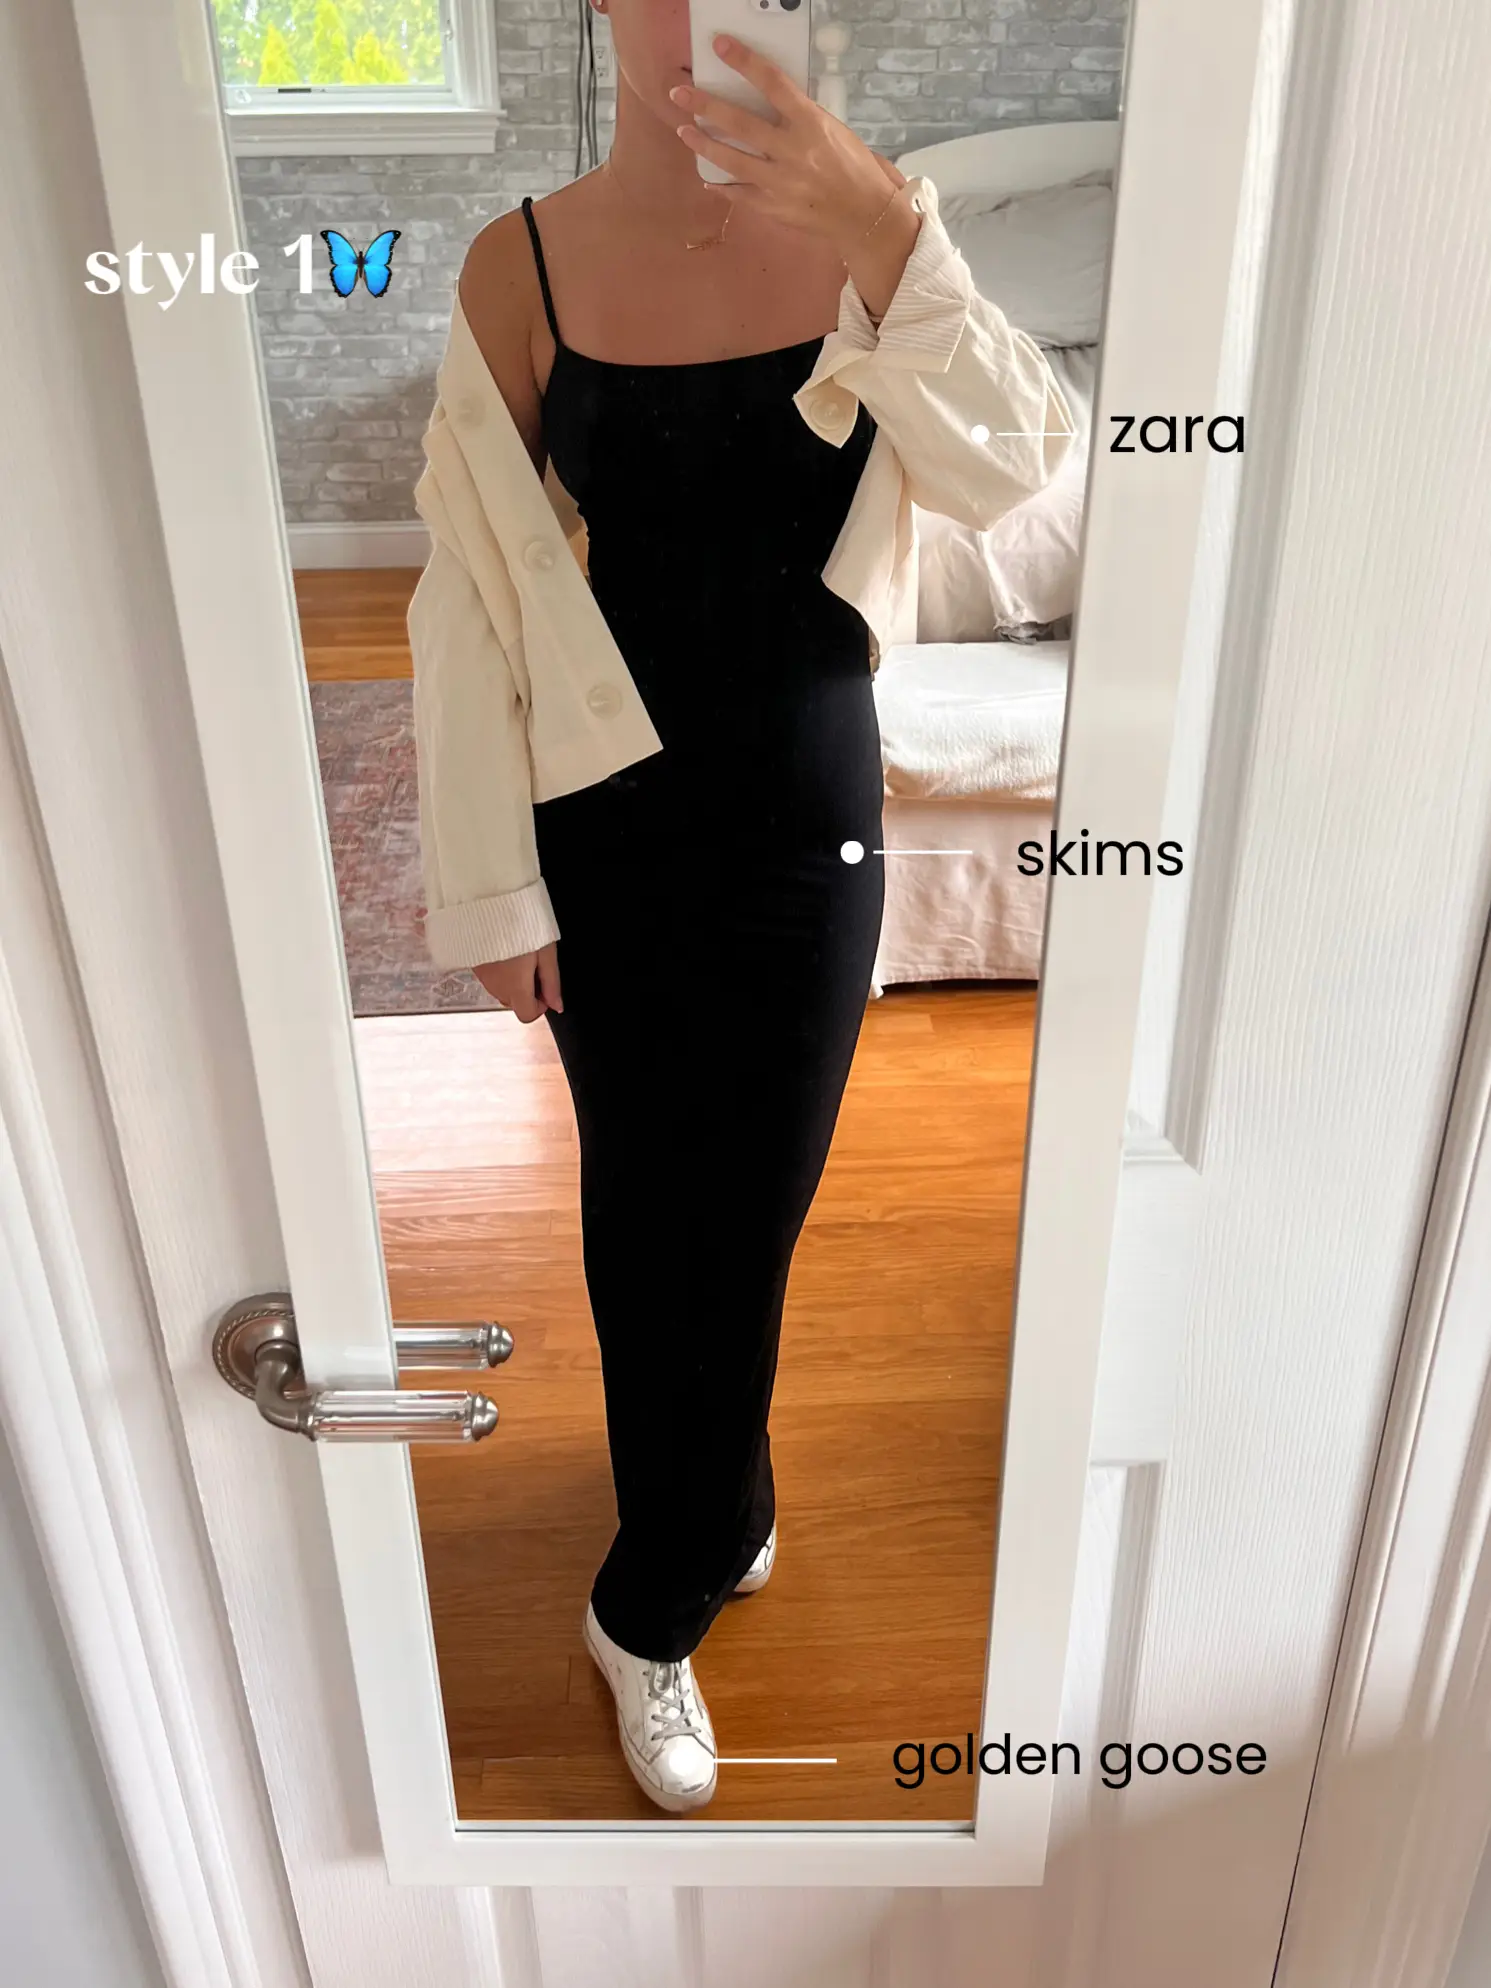 I'm 5'2 and a size 6 - I tried the viral Skims dress in white, it